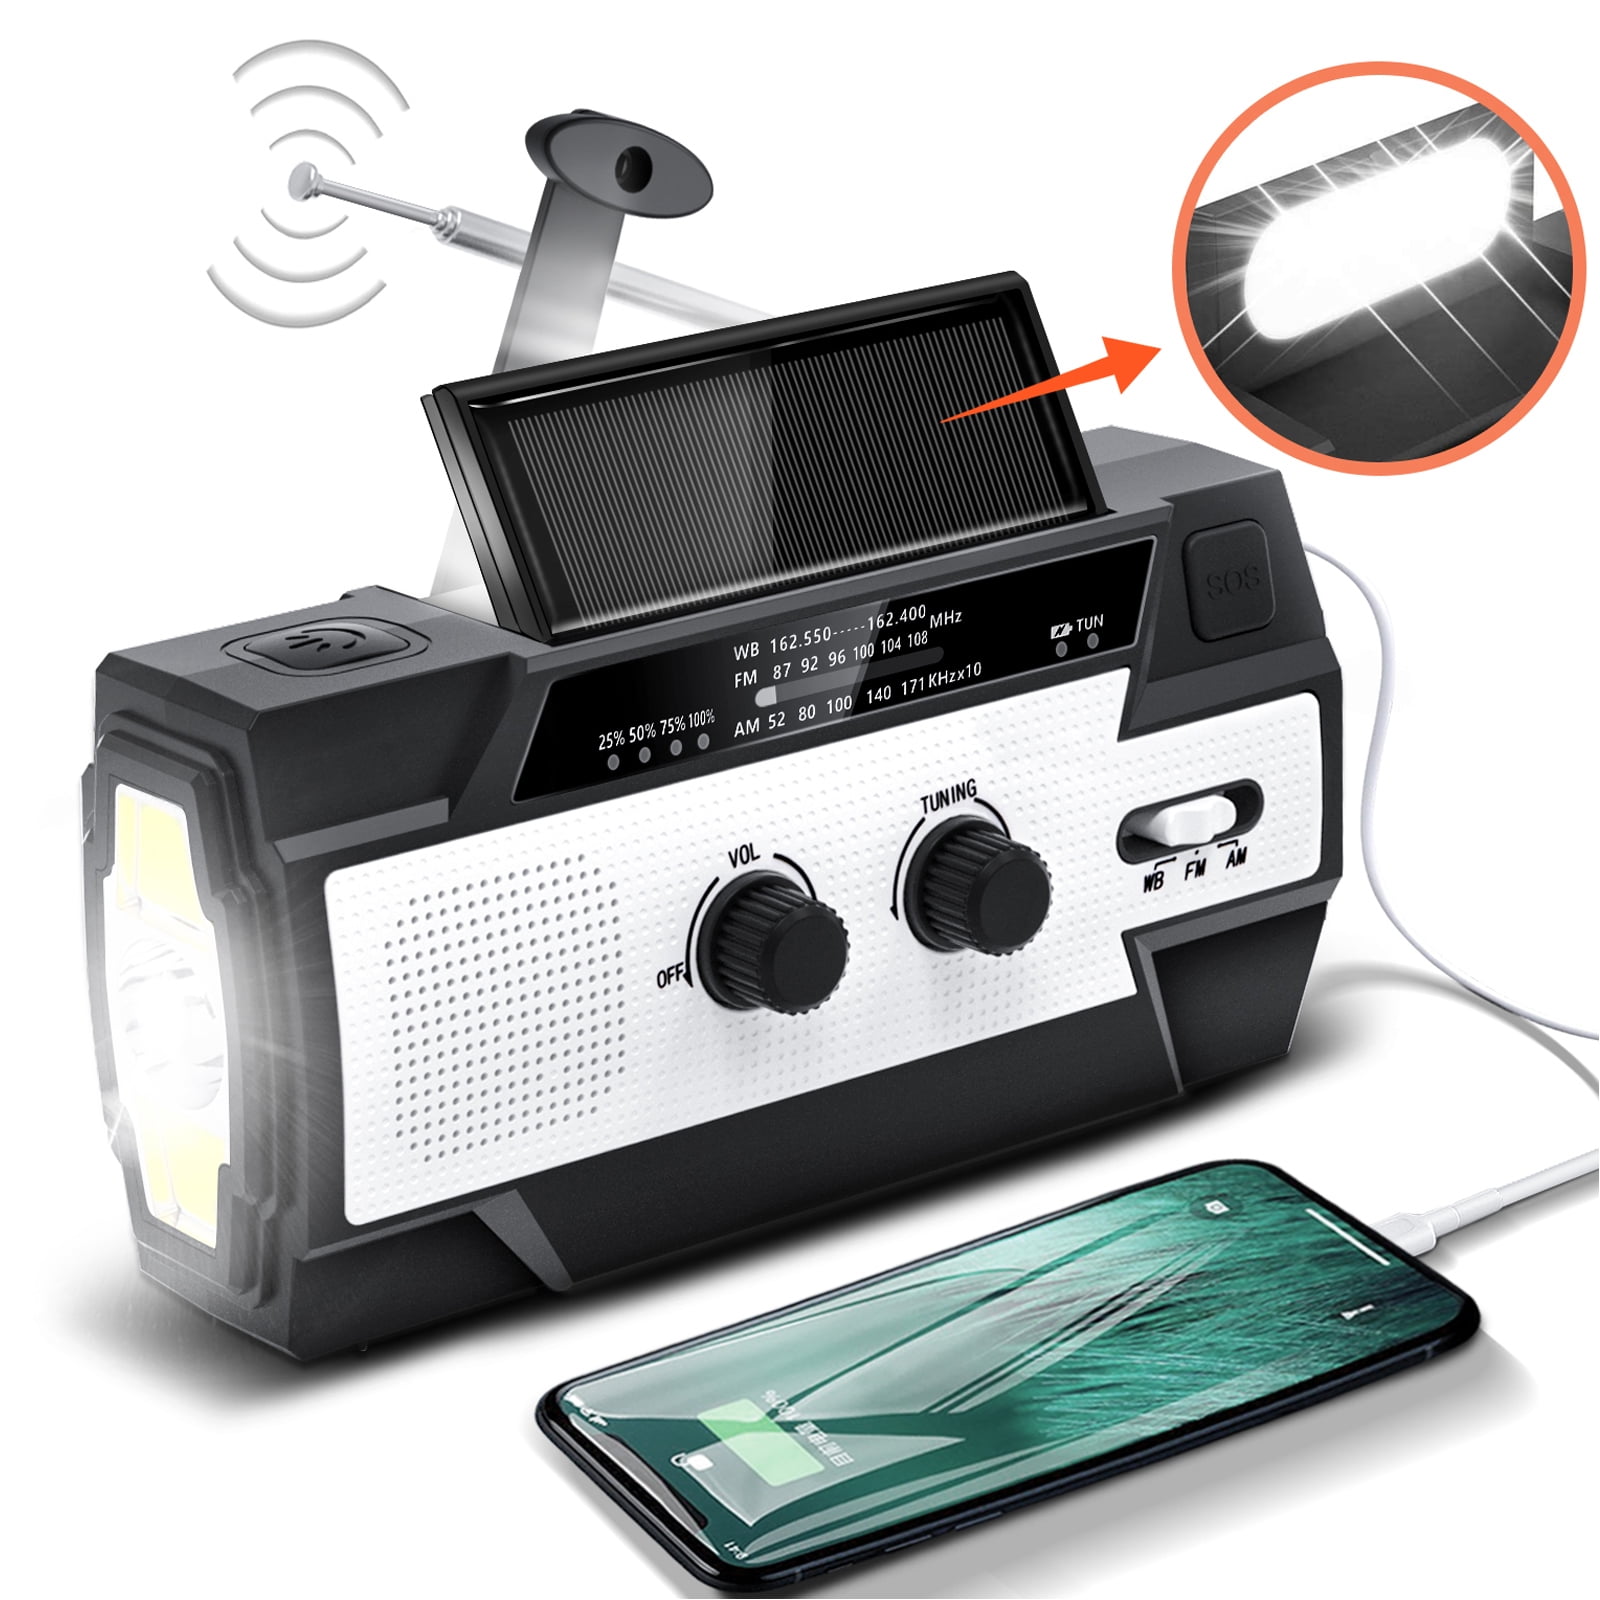 Flashlight RunningSnail Solar Crank NOAA Weather Radio for Emergency with AM/FM Reading Lamp and 2000mAh Power Bank 